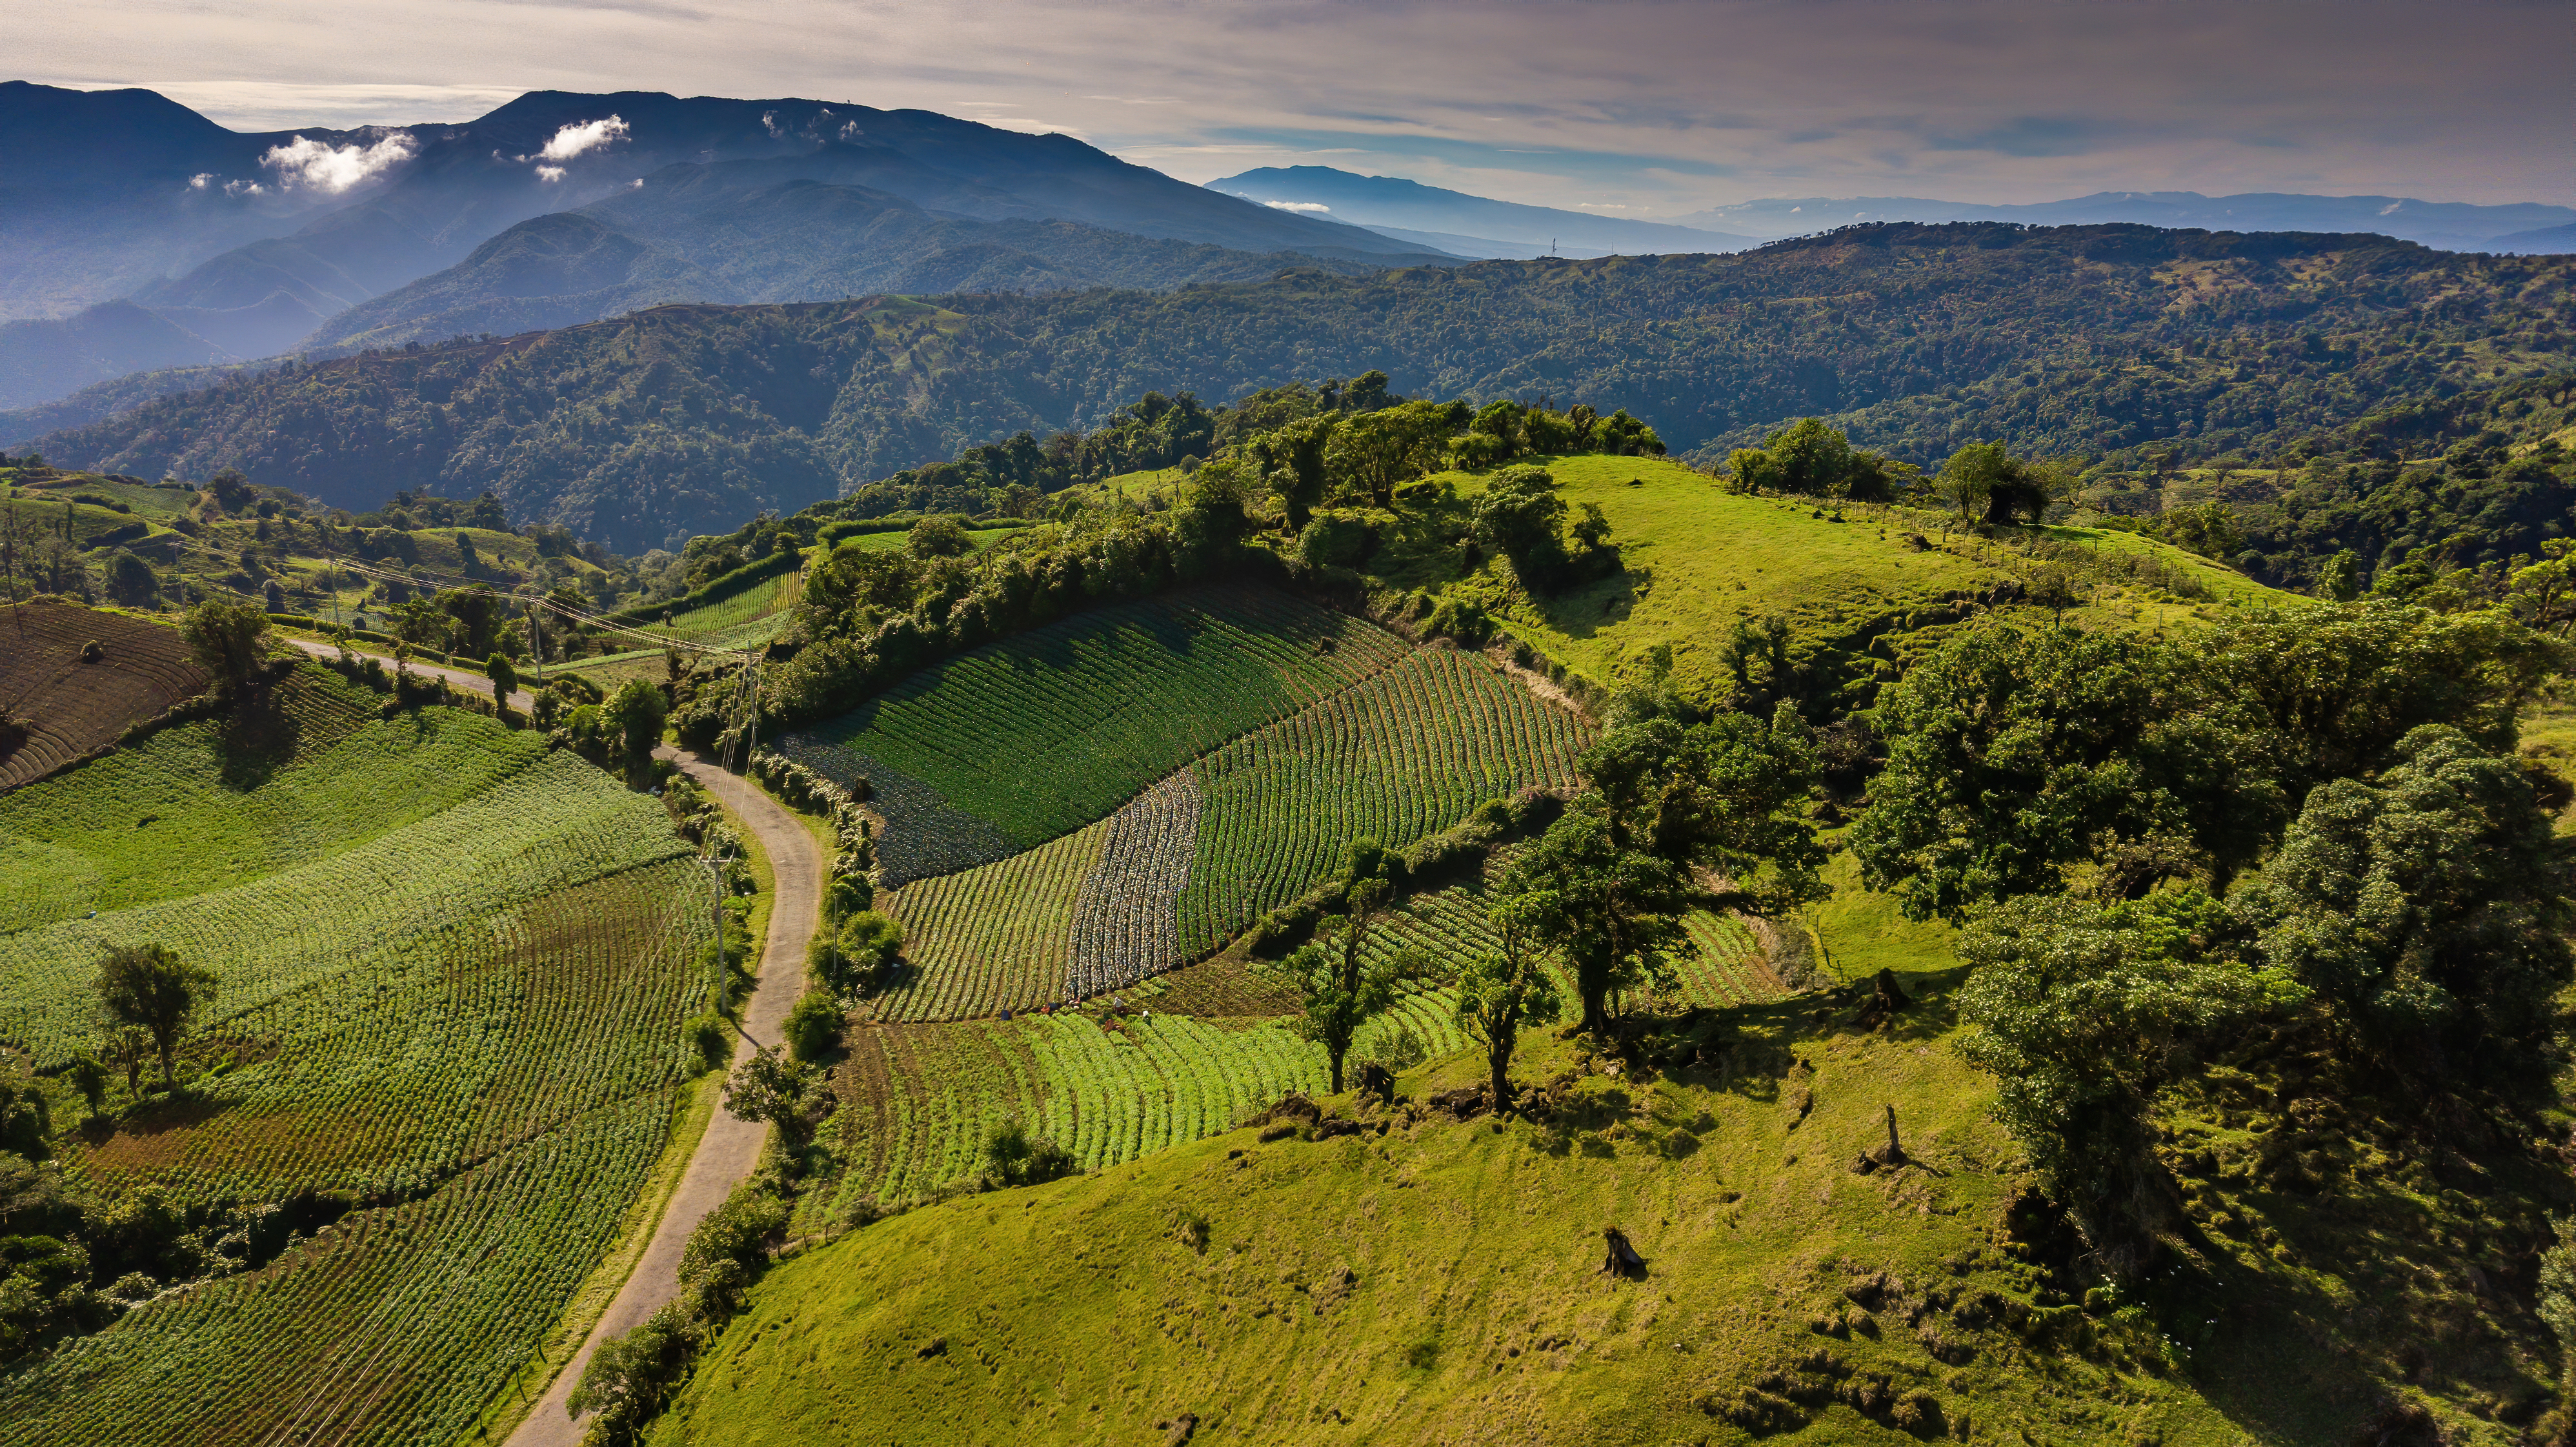 Green rolling hills and mountains in Costa Rice (Raul Cole/Shutterstock)  